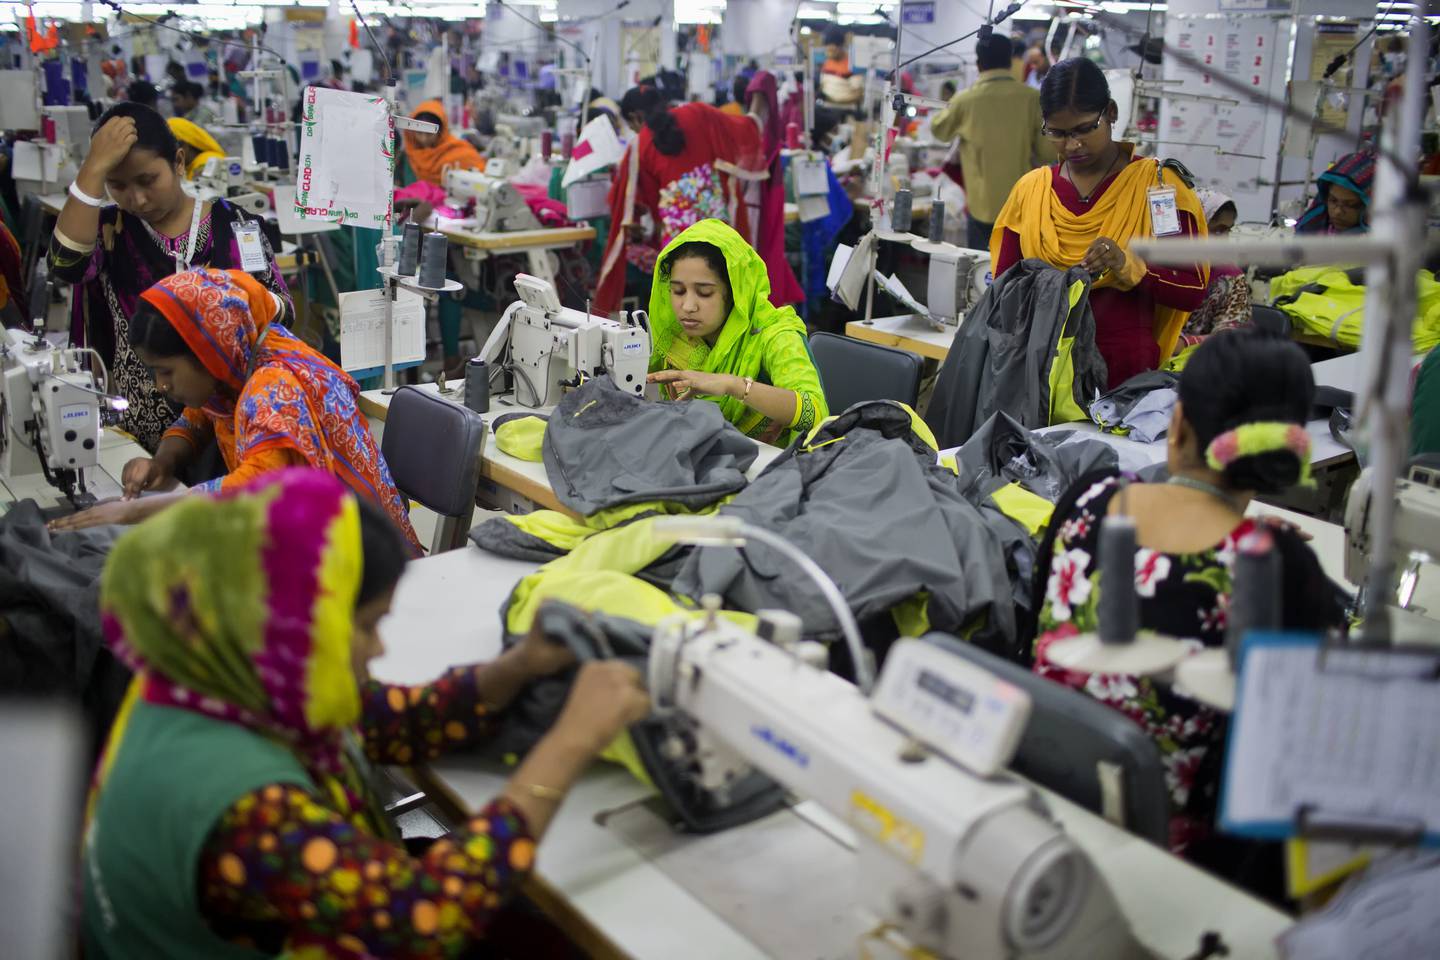 FILE - In this April 19, 2018 photo, Bangladeshis work at Snowtex garment factory in Dhamrai, near Dhaka, Bangladesh. A group set up by European clothing brands that has monitored factory safety in Bangladesh for years plans to leave, with its duties being assumed by a local group including unions and industry figures in the world's second-largest garment manufacturer. The European group and a separate North American group were formed after the collapse of Rana Plaza, a building housing five garment factories that made clothing for international brands. The departure, which officials said Thursday, Jan. 16, 2019, was planned for May, follows a protracted tussle with garment manufacturers who wanted Bangladesh's government to form a local watch group to monitor the sector. (AP Photo/A.M. Ahad)